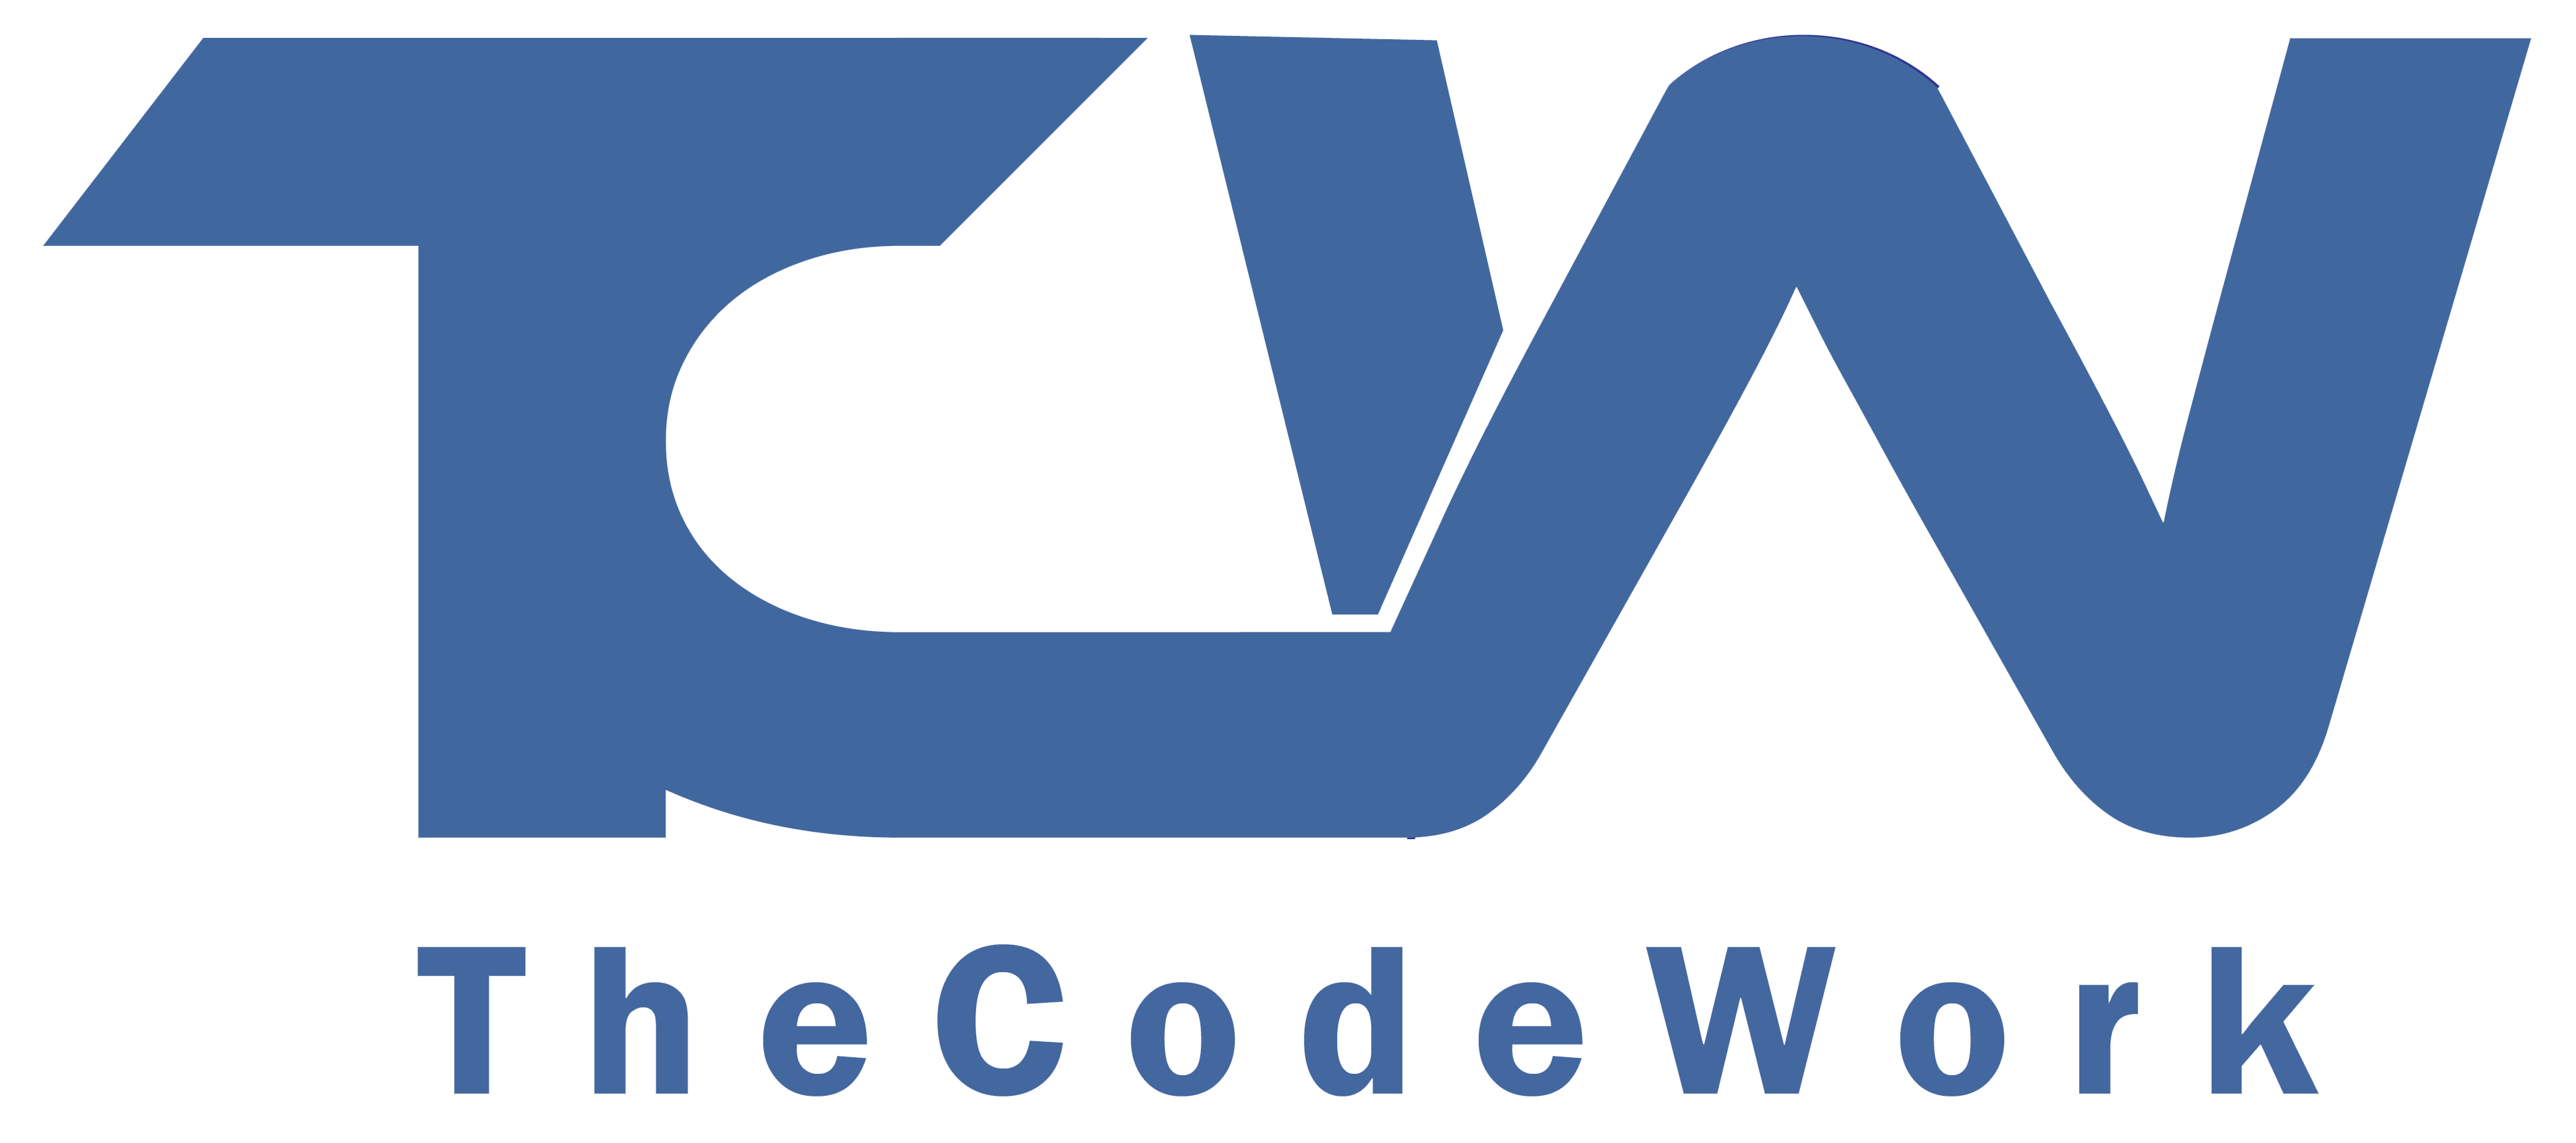 TheCodeWork profile on Qualified.One